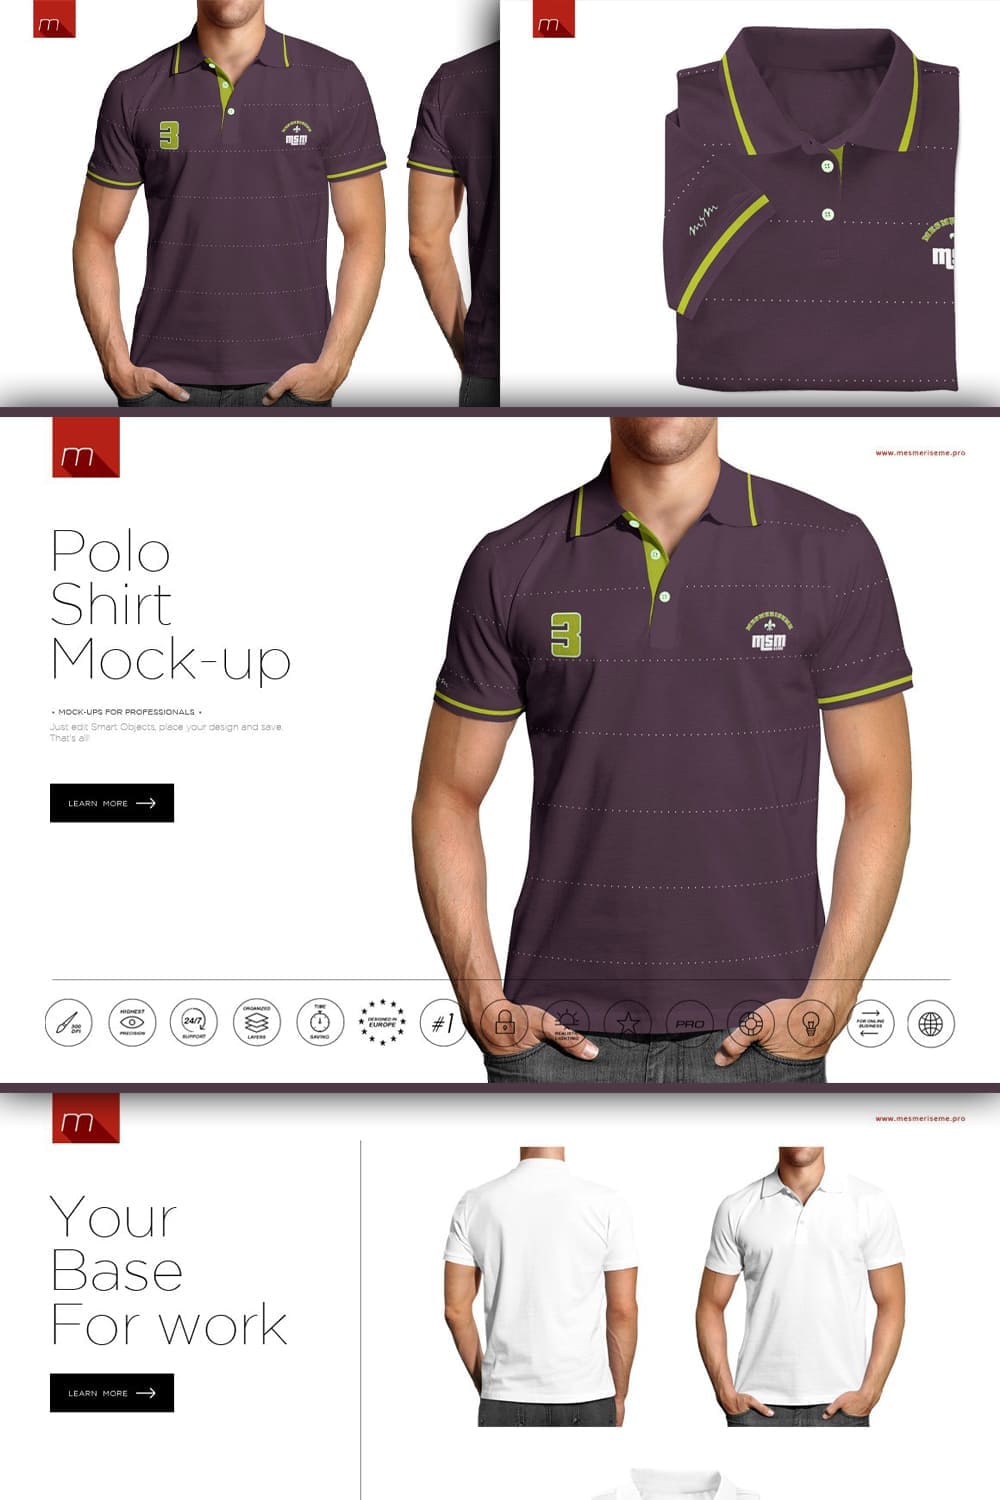 Gray men's polo shirt with three white buttons.